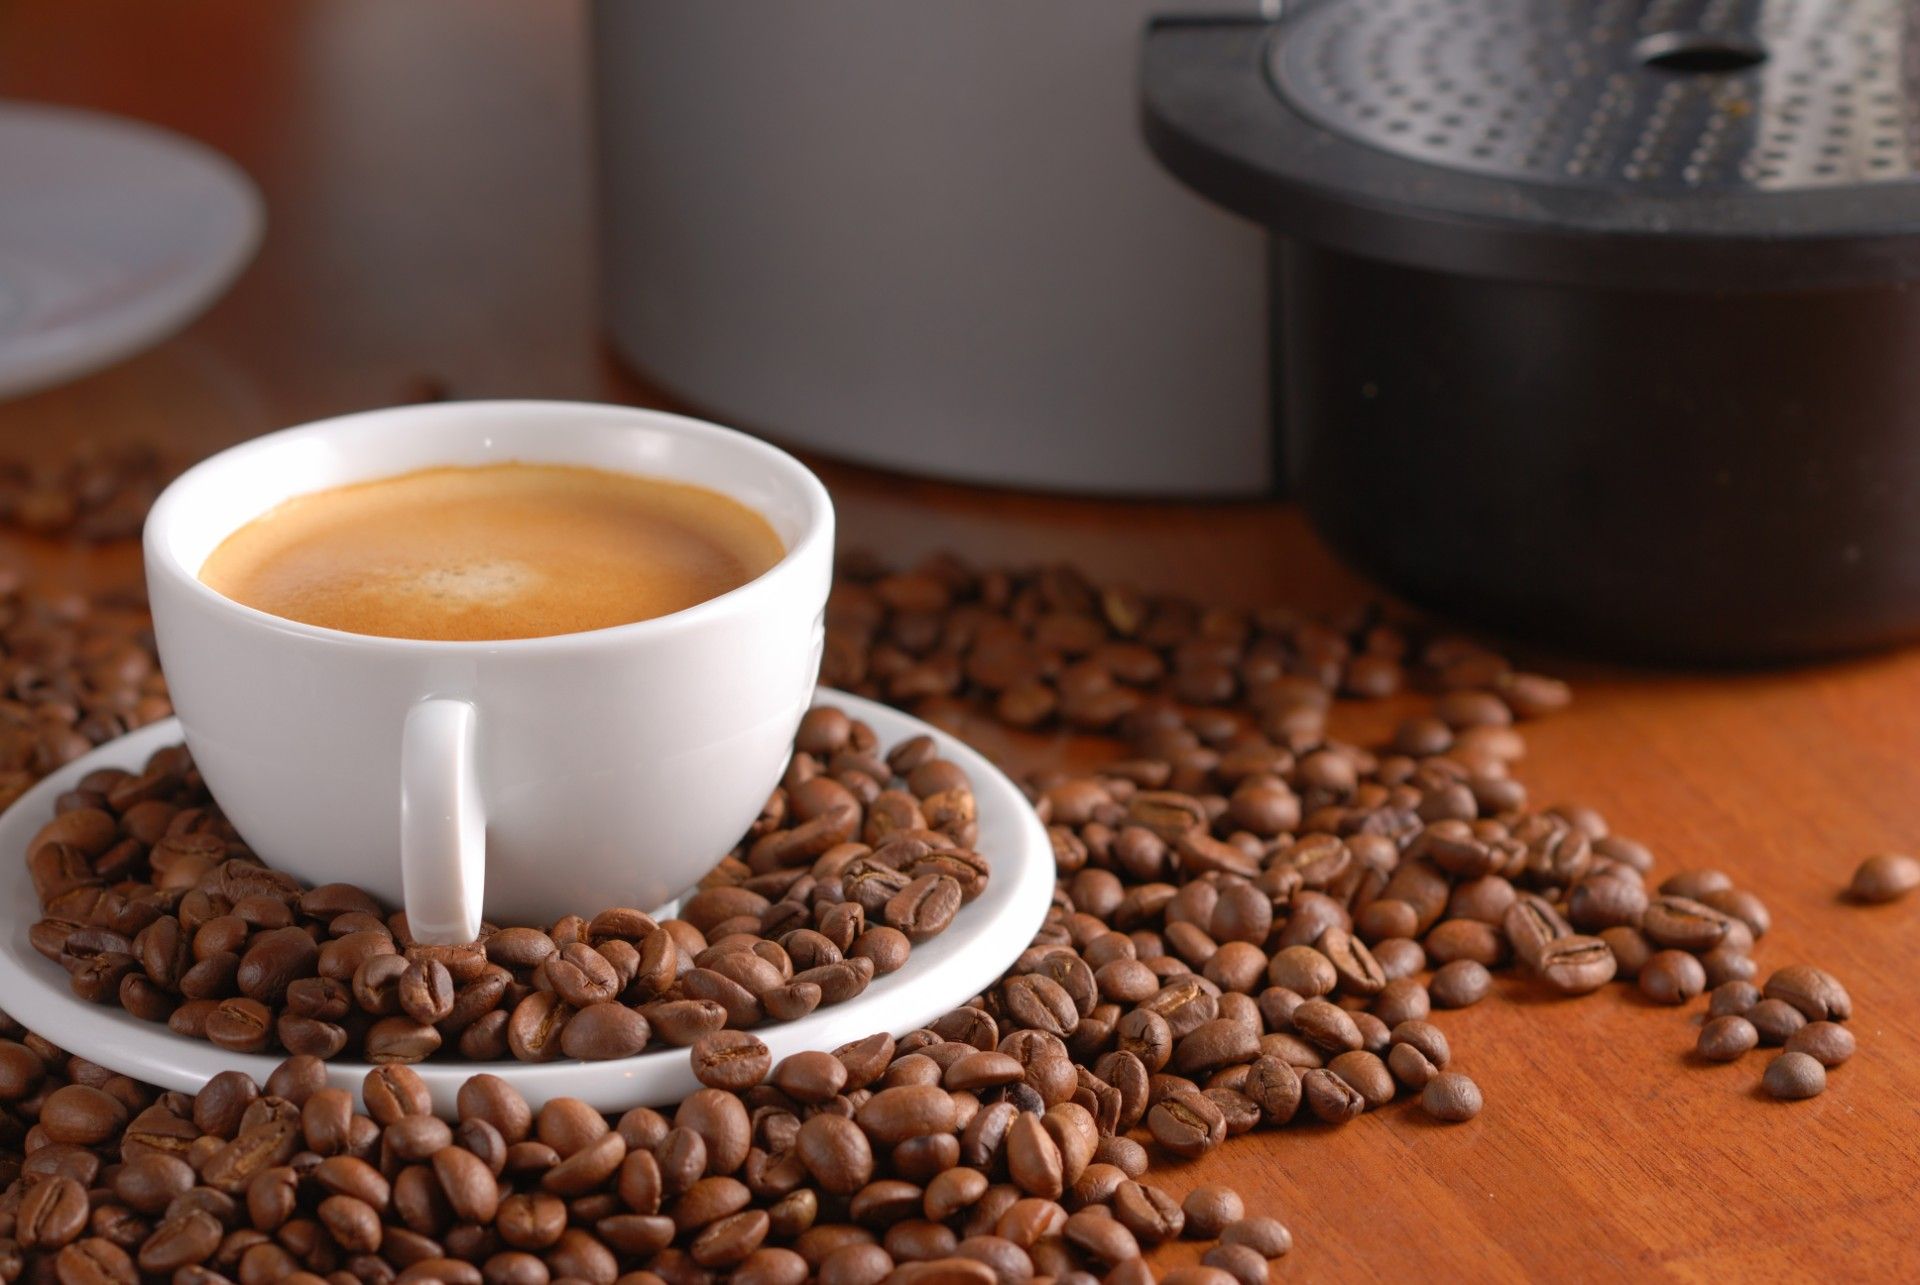 A cup of coffee surrounded by coffee beans sits near a coffee maker - keurig coffee pods